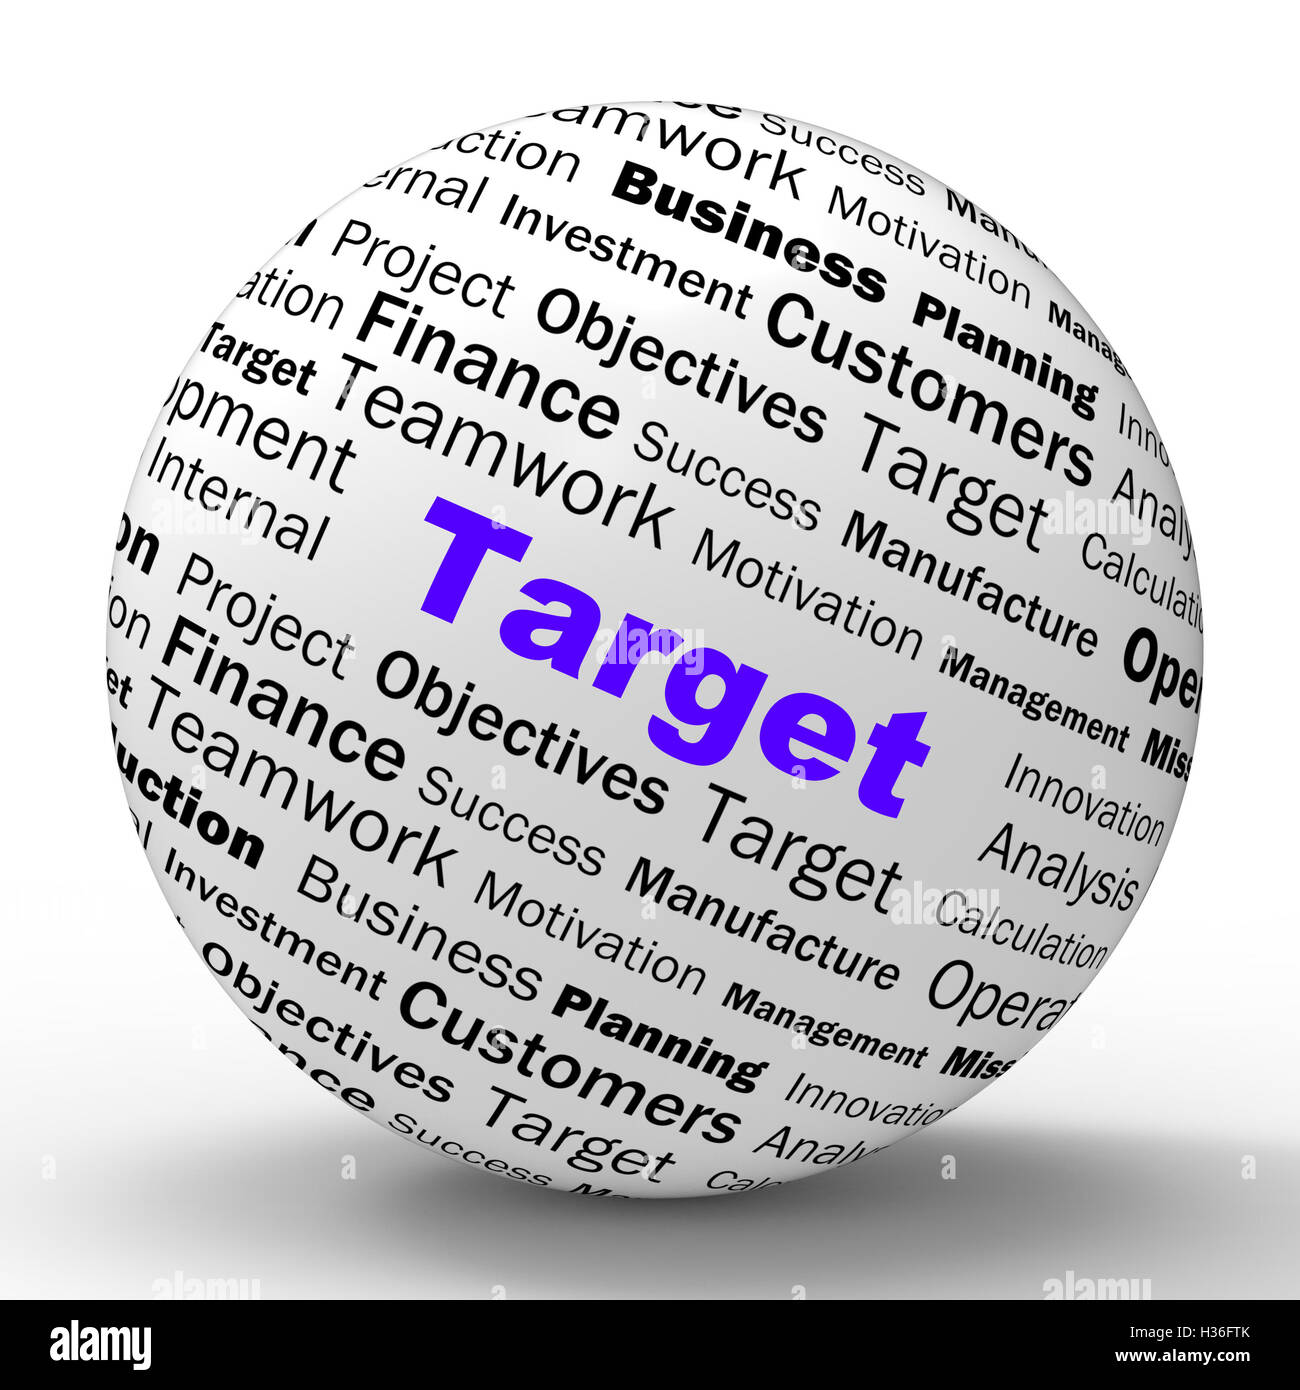 Target Sphere Definition Means Business Goals And Objectives Stock Photo